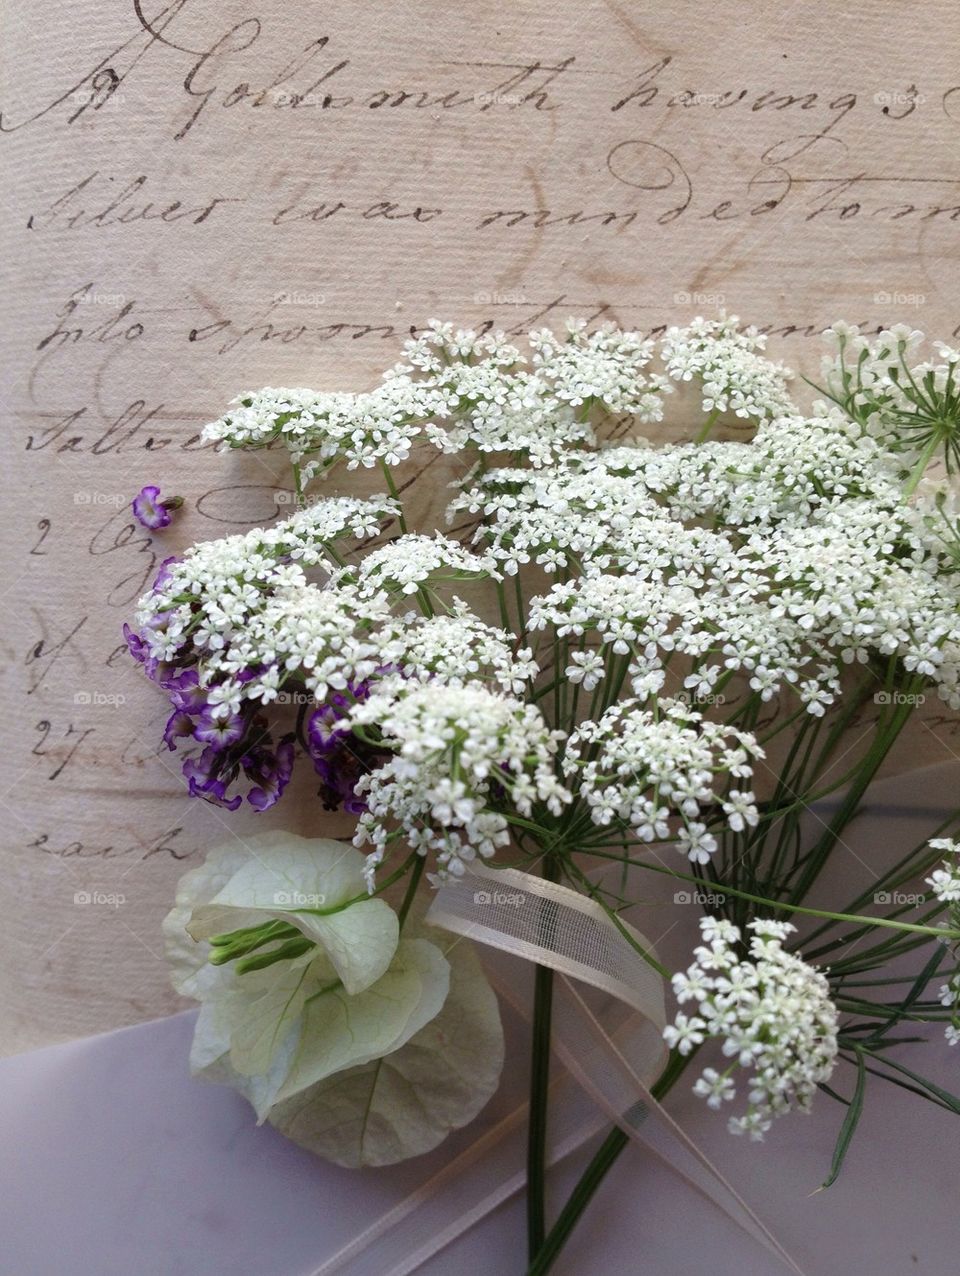 Vintage script with white flowers